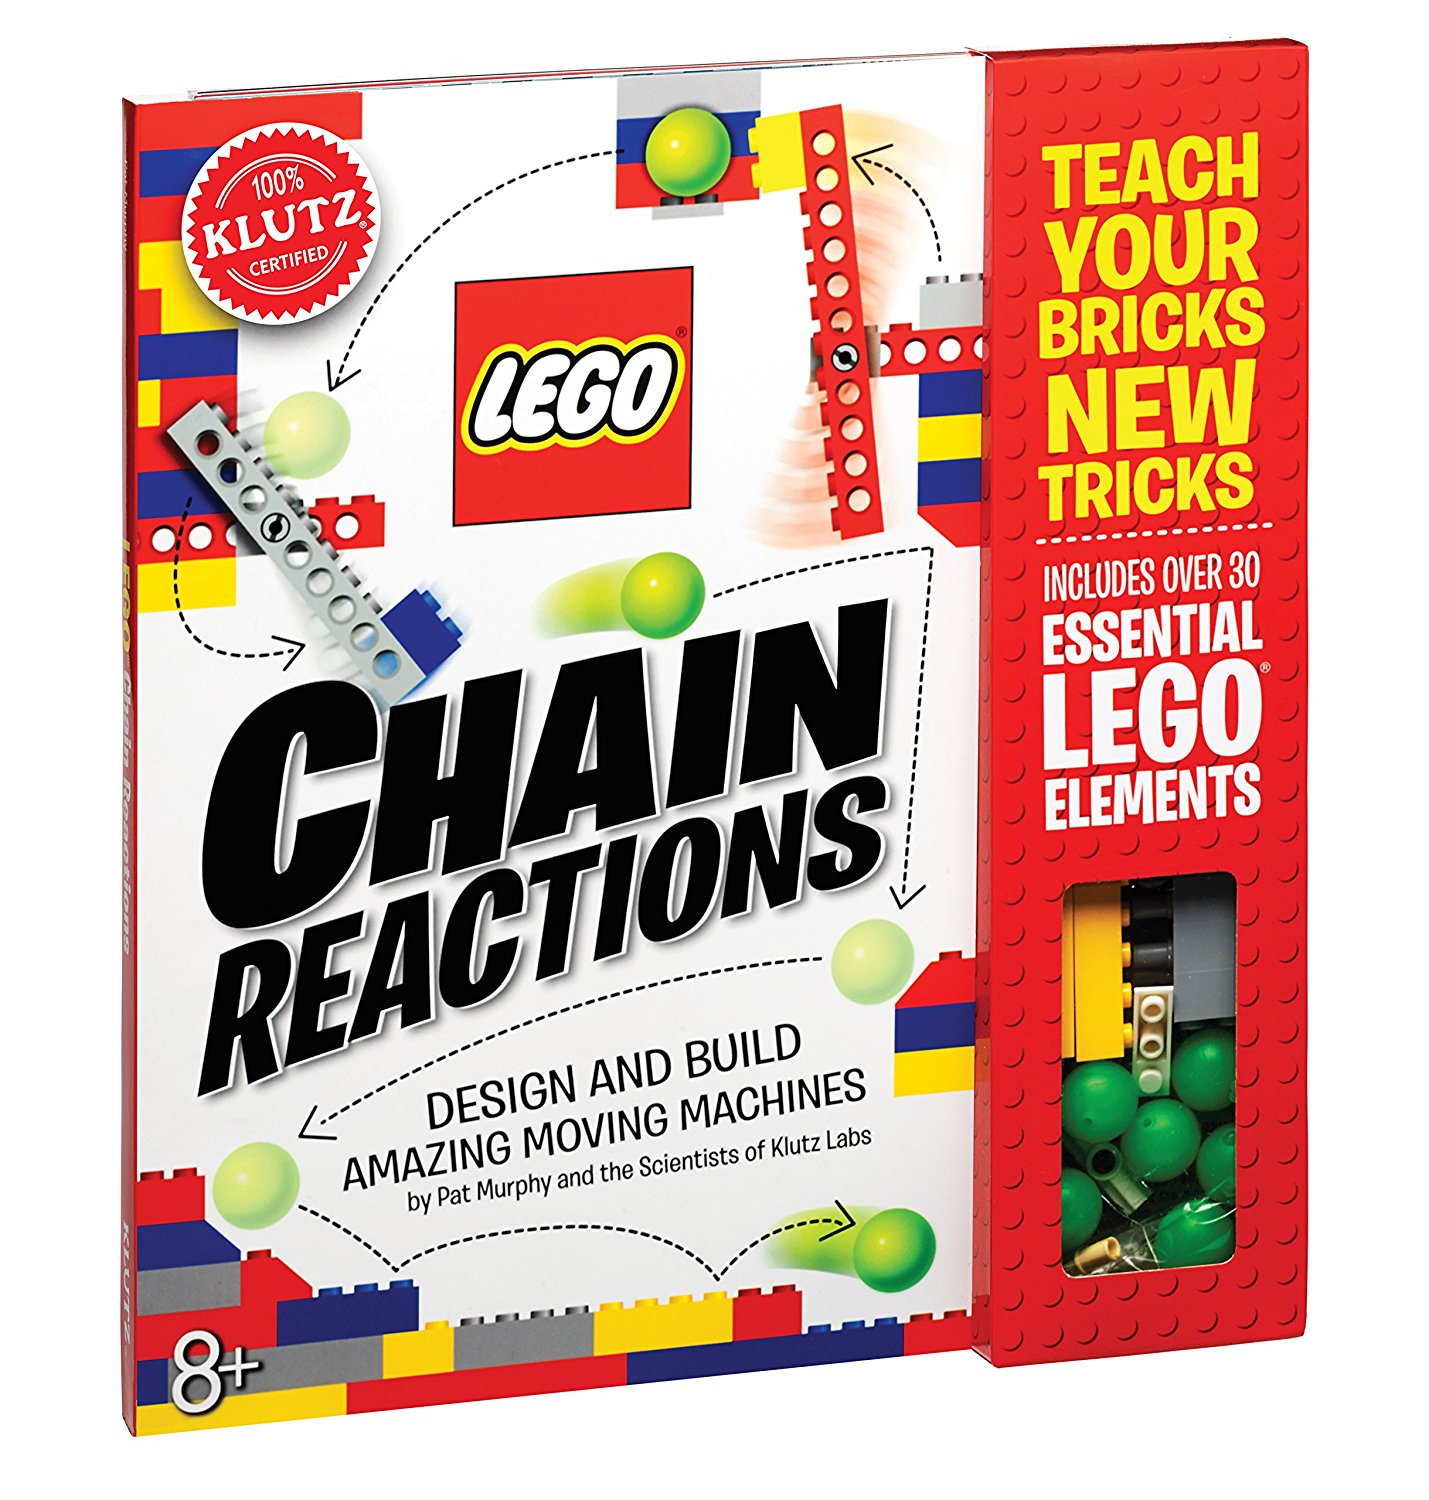 Klutz LEGO Chain Reactions Craft Kit – Just $14.99!